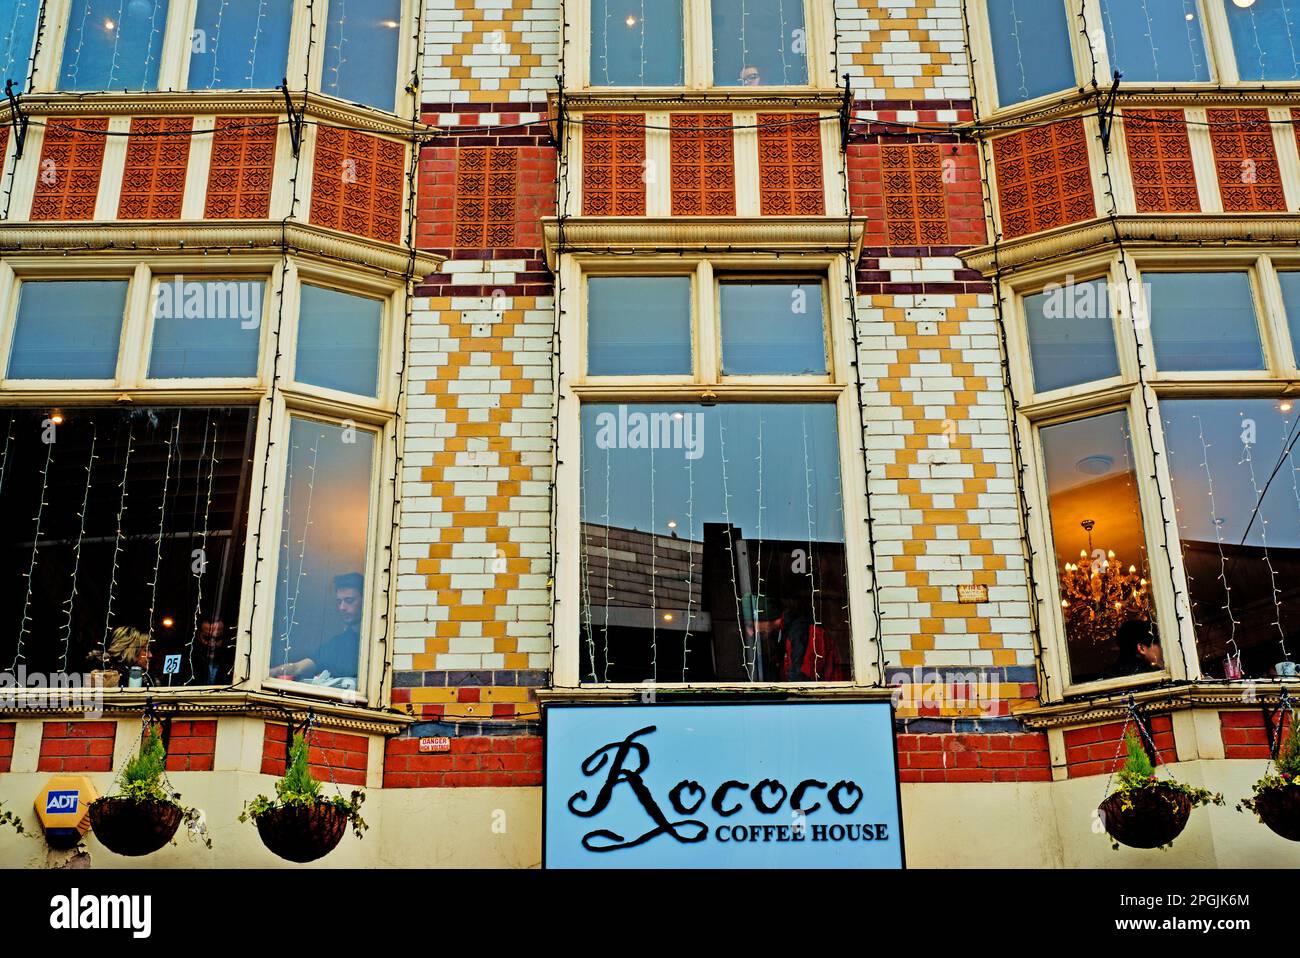 Rococo Coffee House, Lord Street, Liverpool, Merseyside, Angleterre Banque D'Images